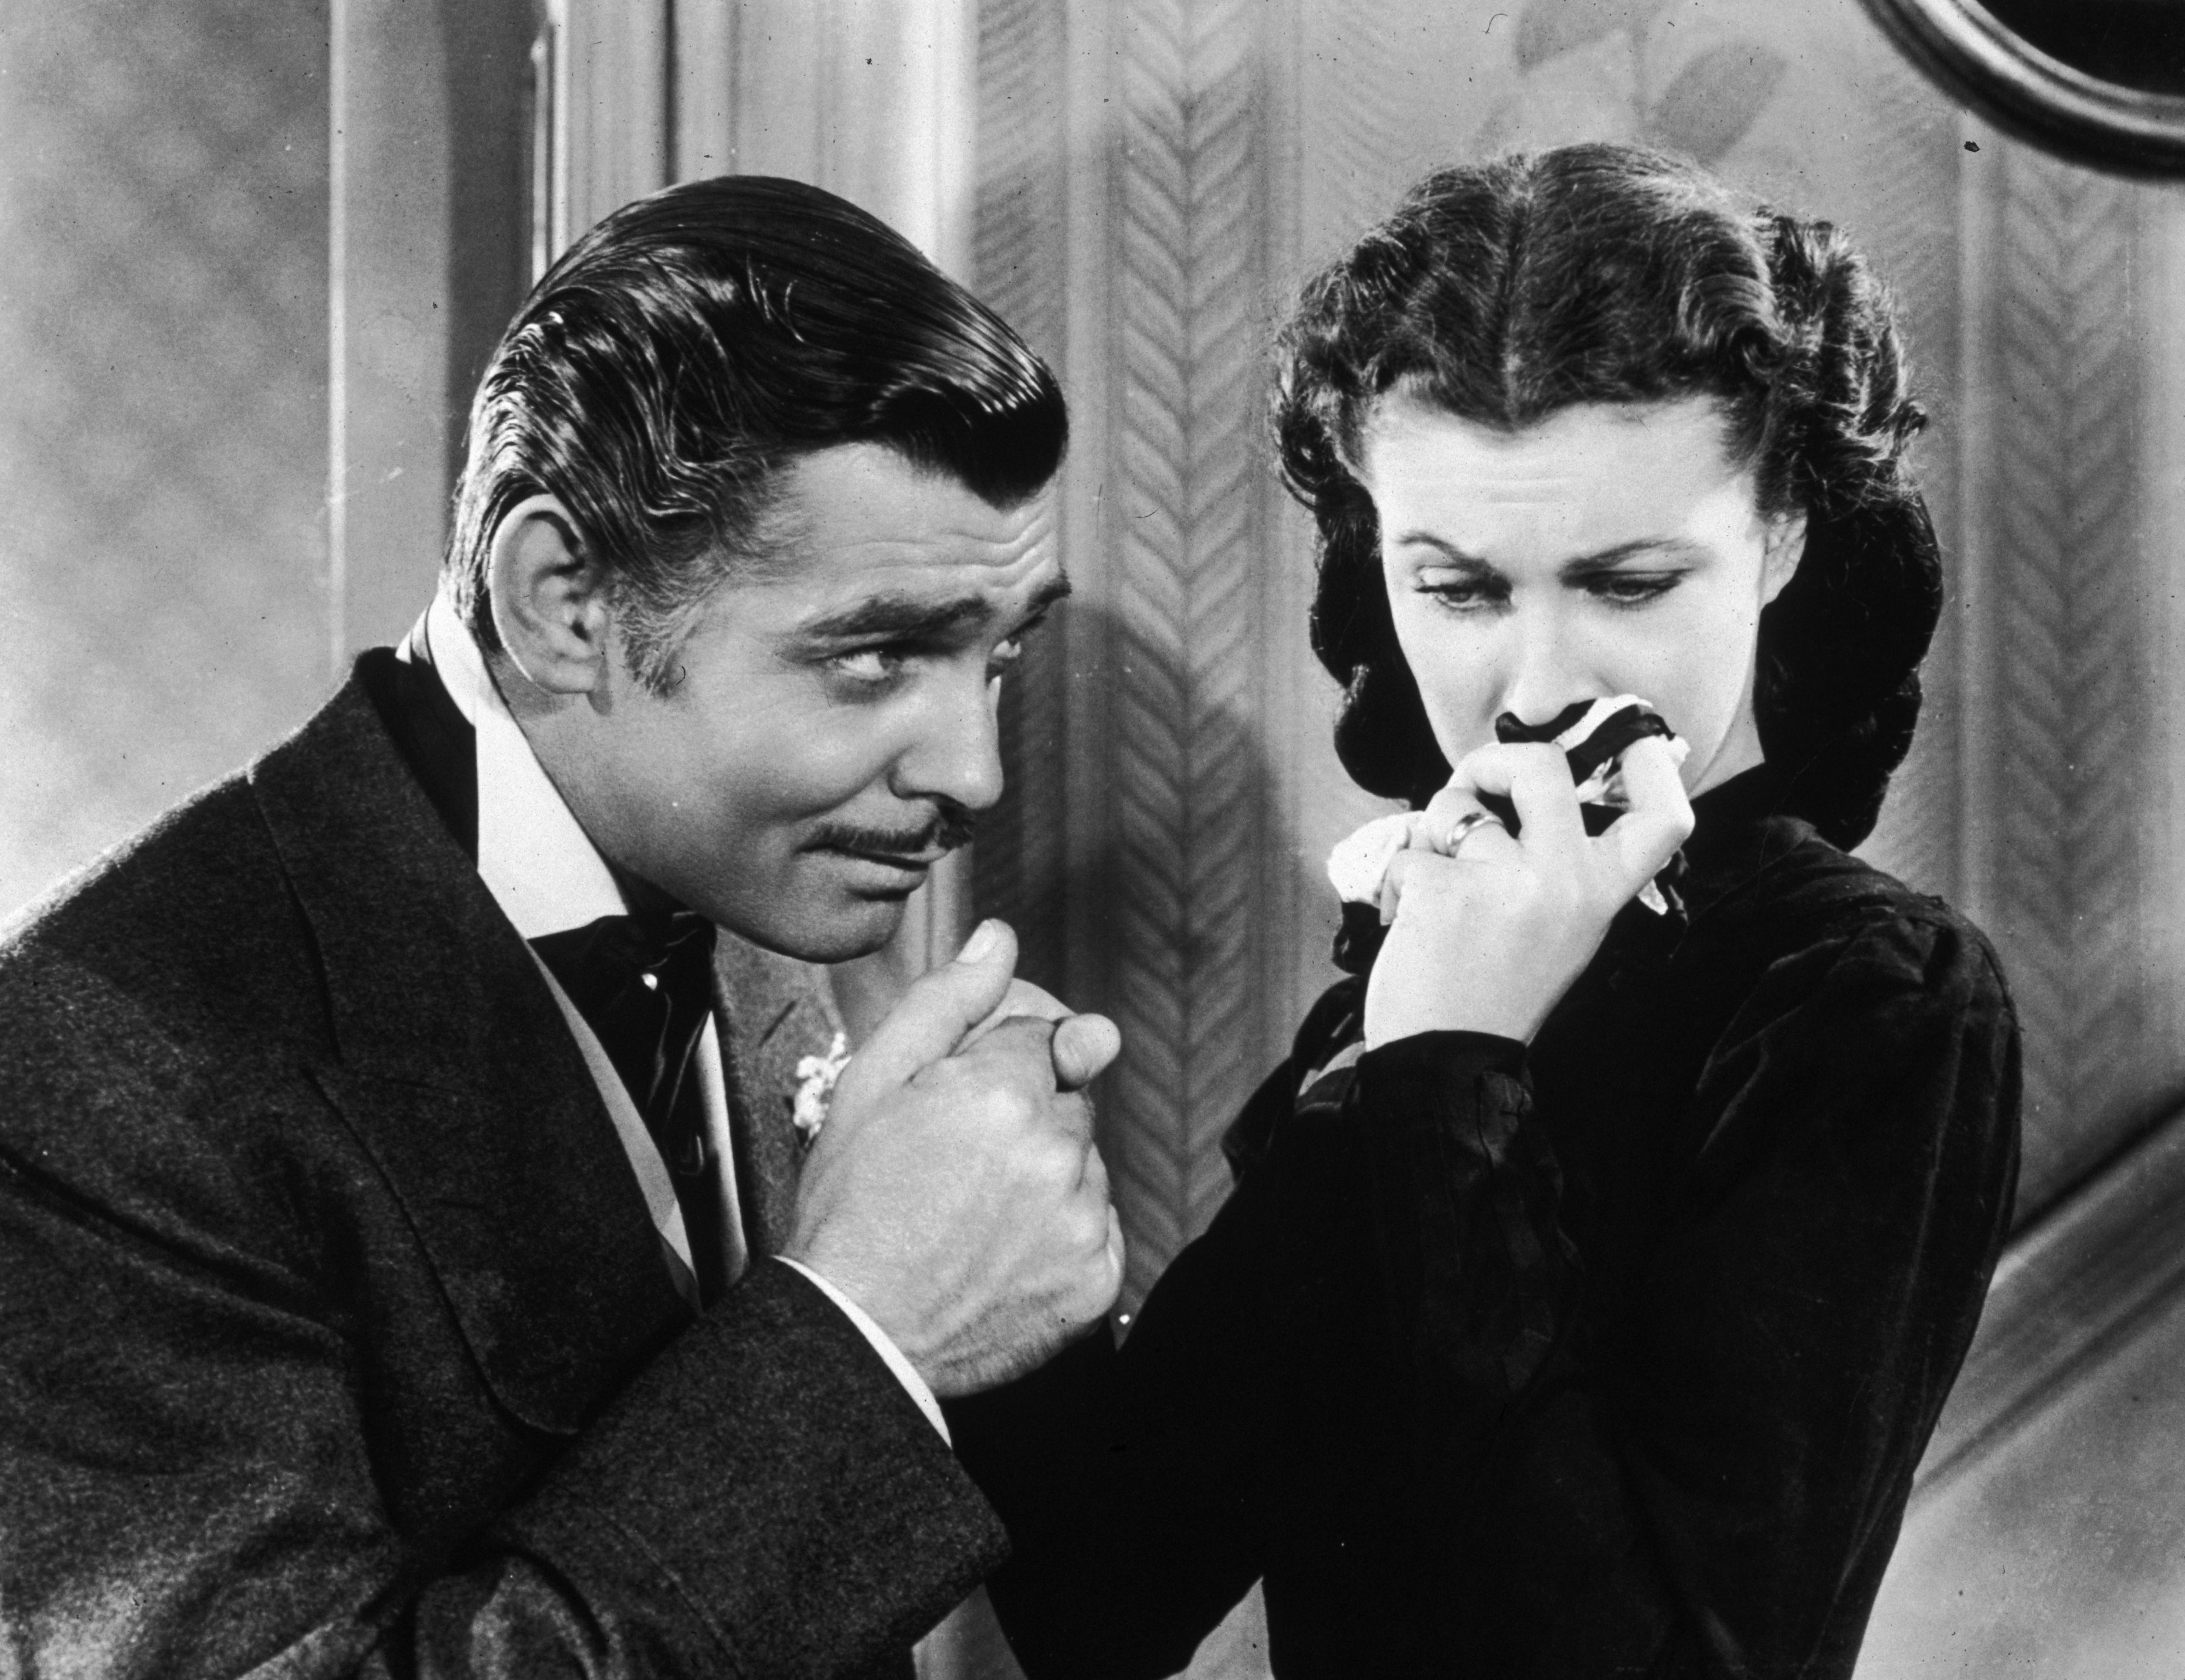 Clark Gable as Rhett Butler with  Vivien Leigh as Scarlett O'Hara in 'Gone With The Wind' | Photo: Getty Images